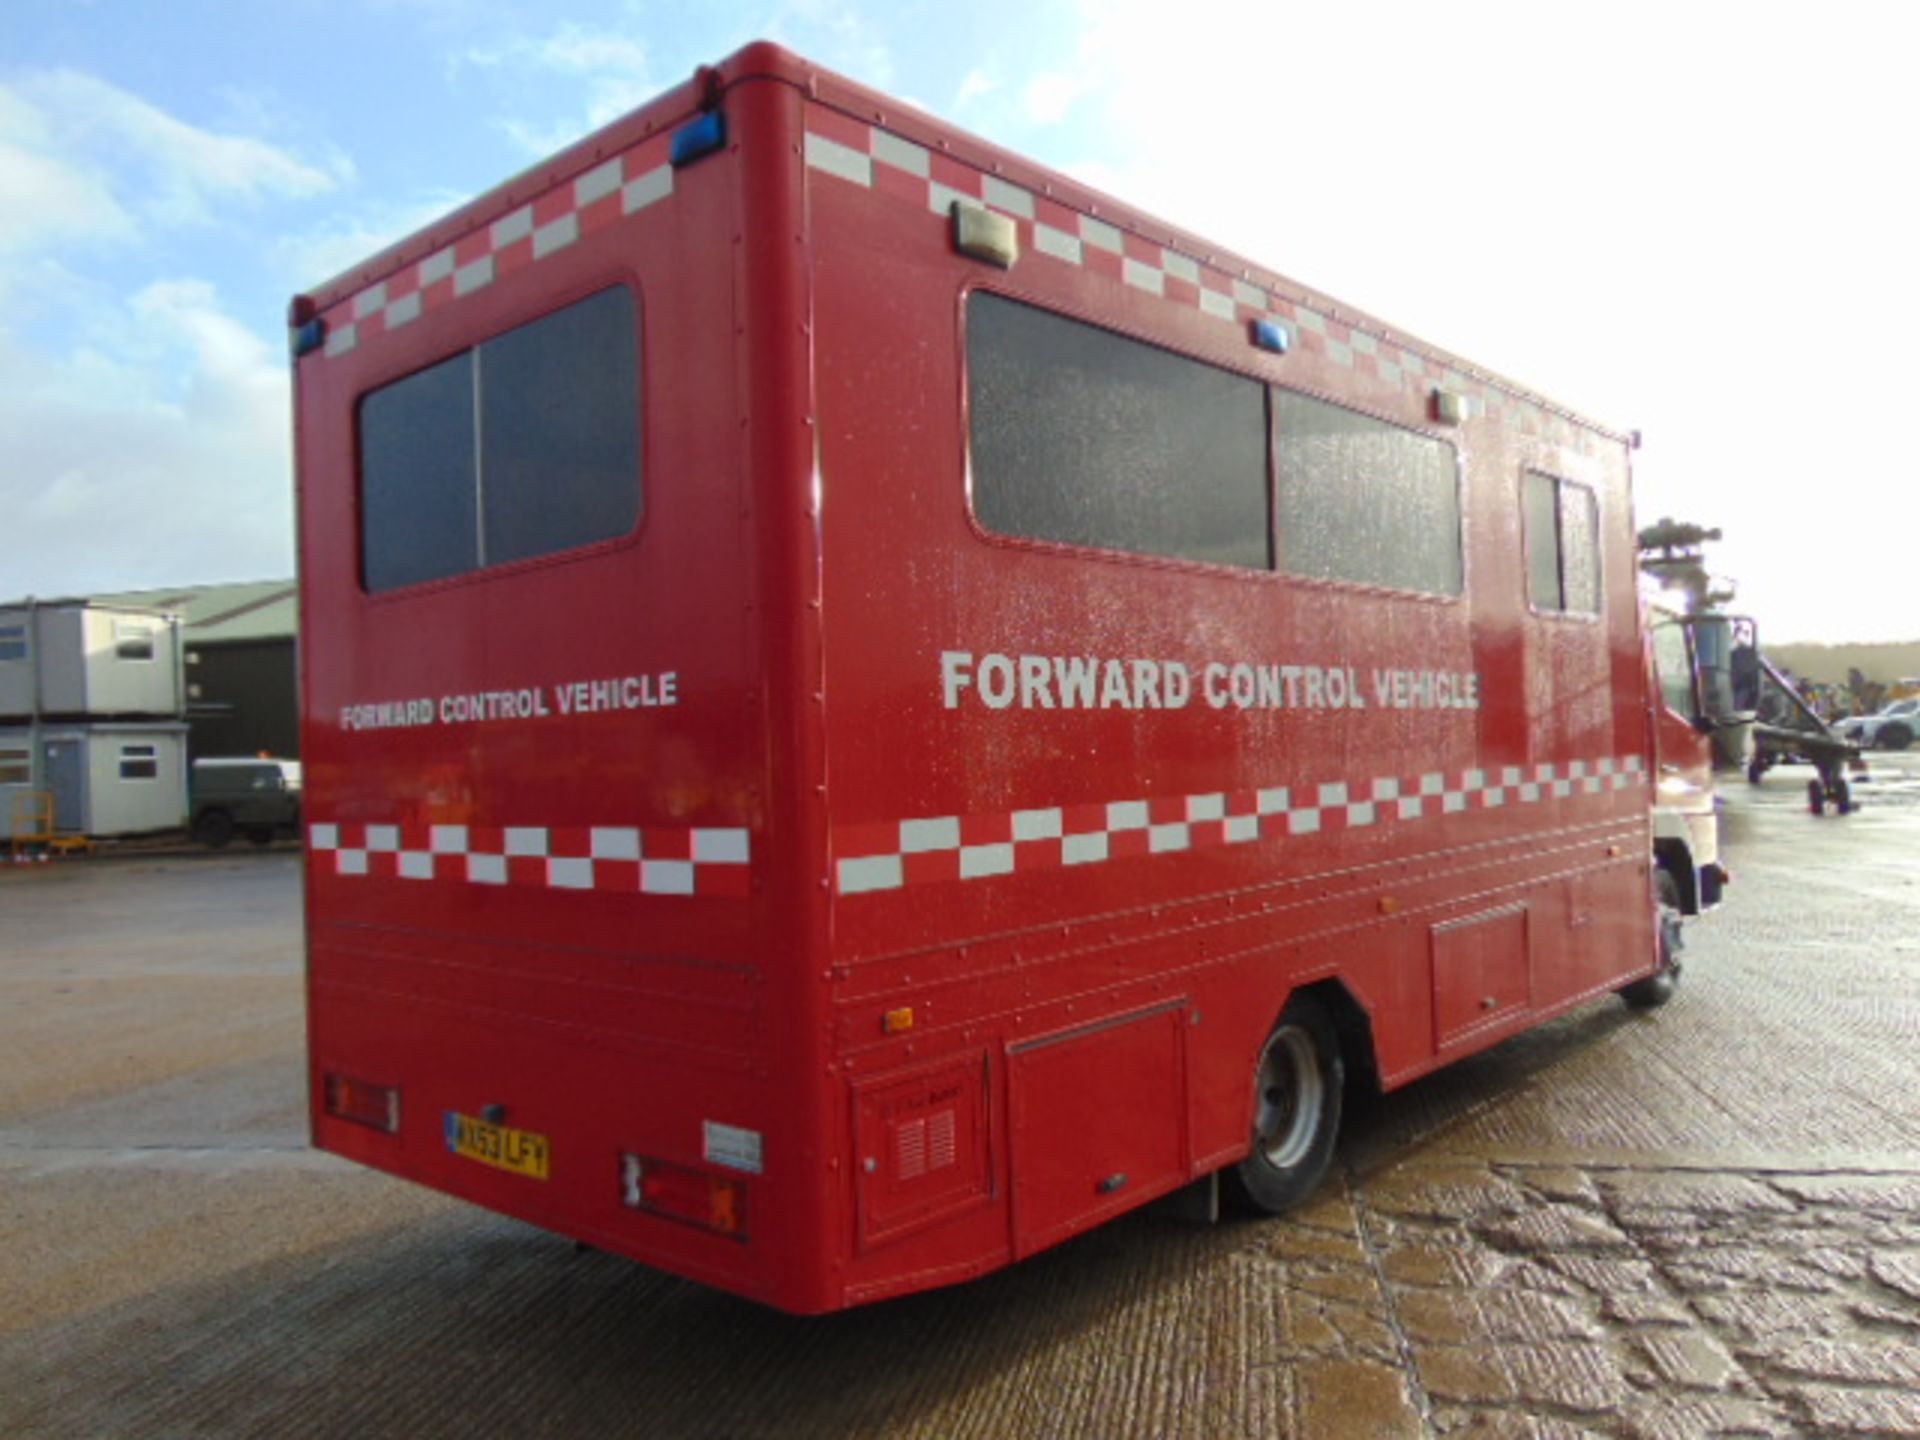 2003 Mercedes 815 4x2 Forward Control Vehicle - Image 6 of 24